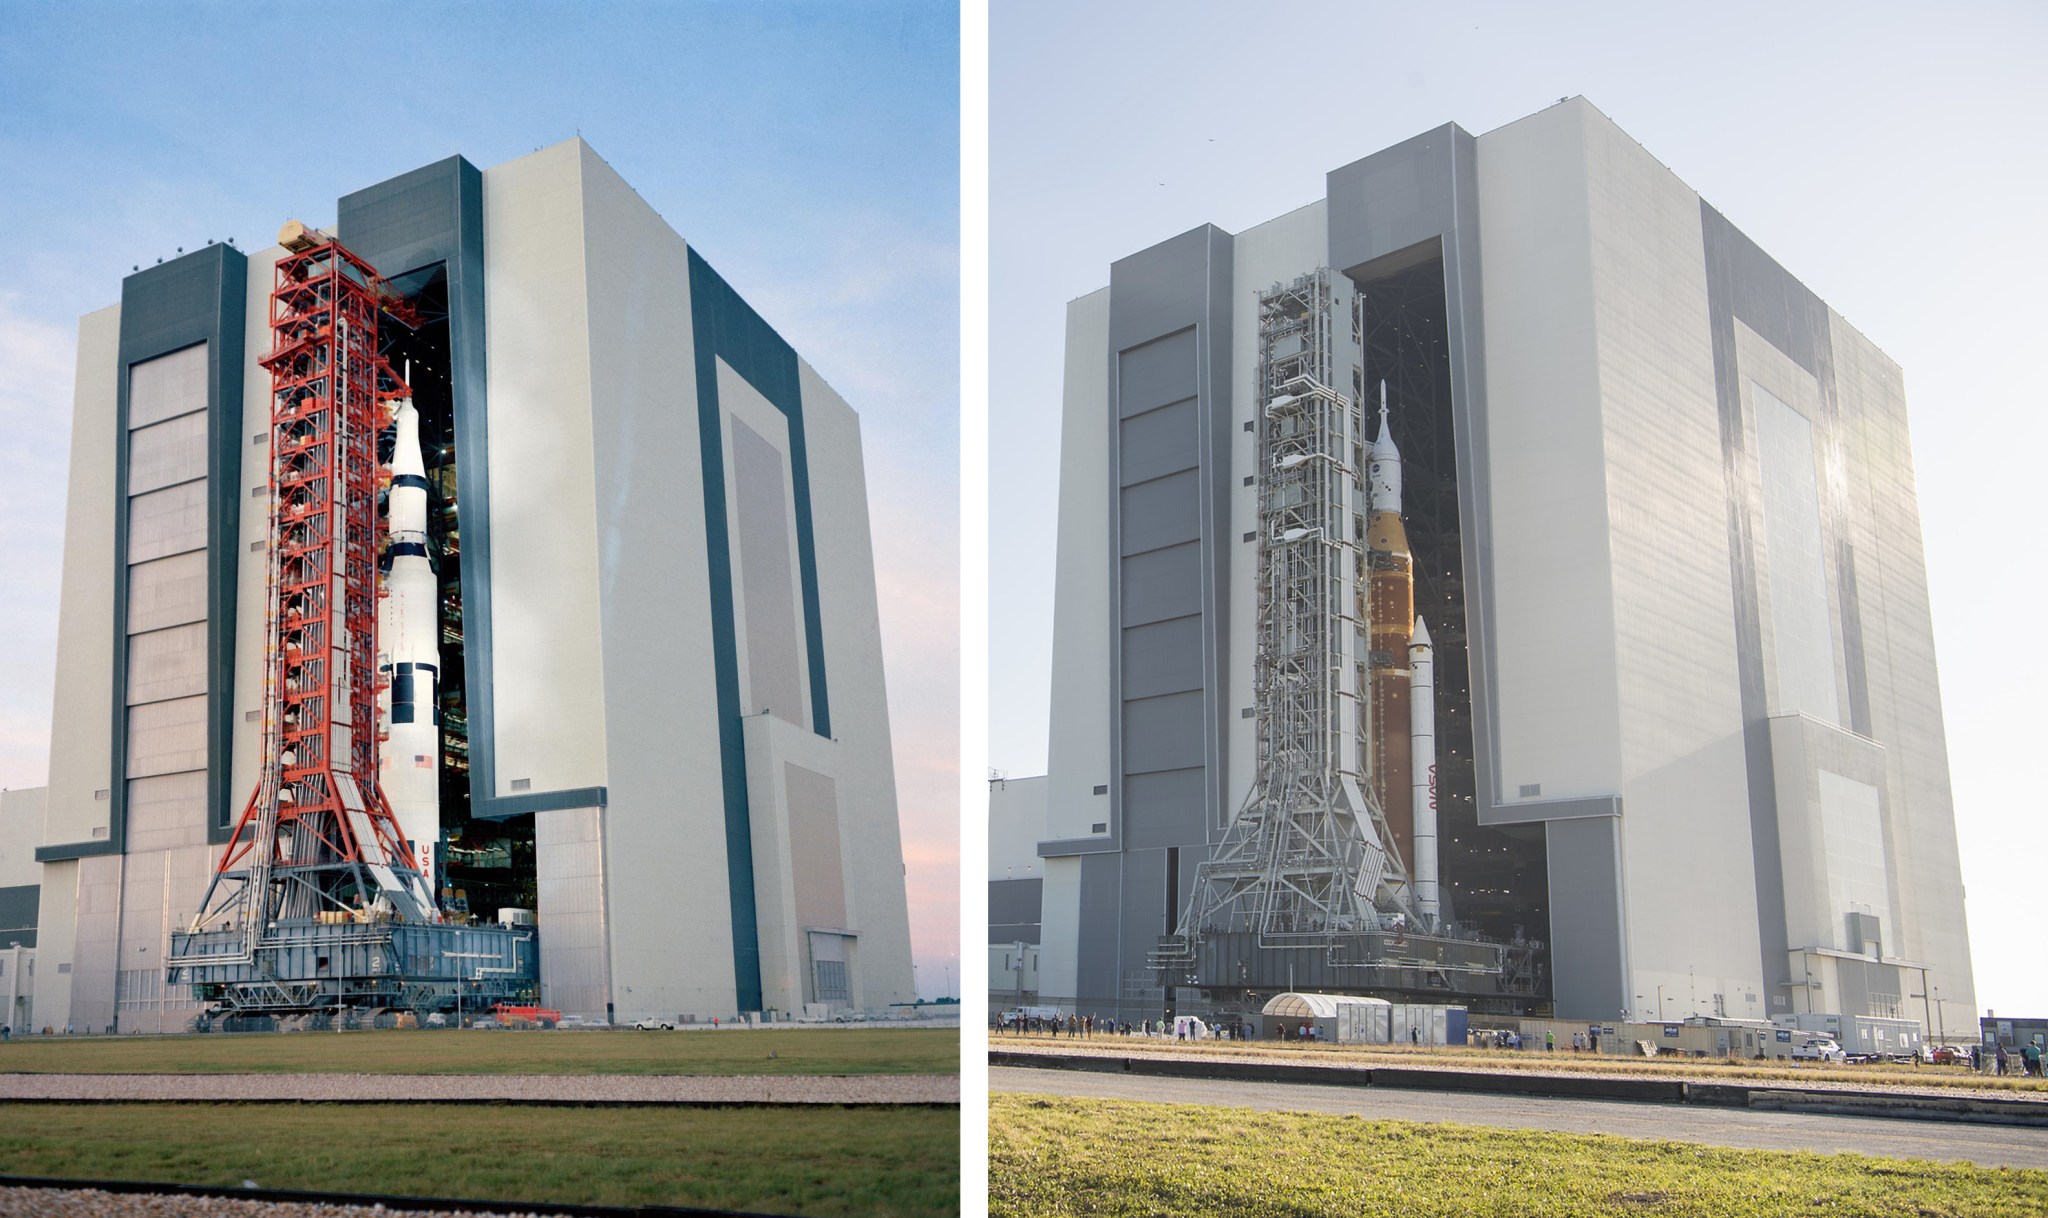 Kennedy Space Center's Vehicle Assembly Building with rockets.